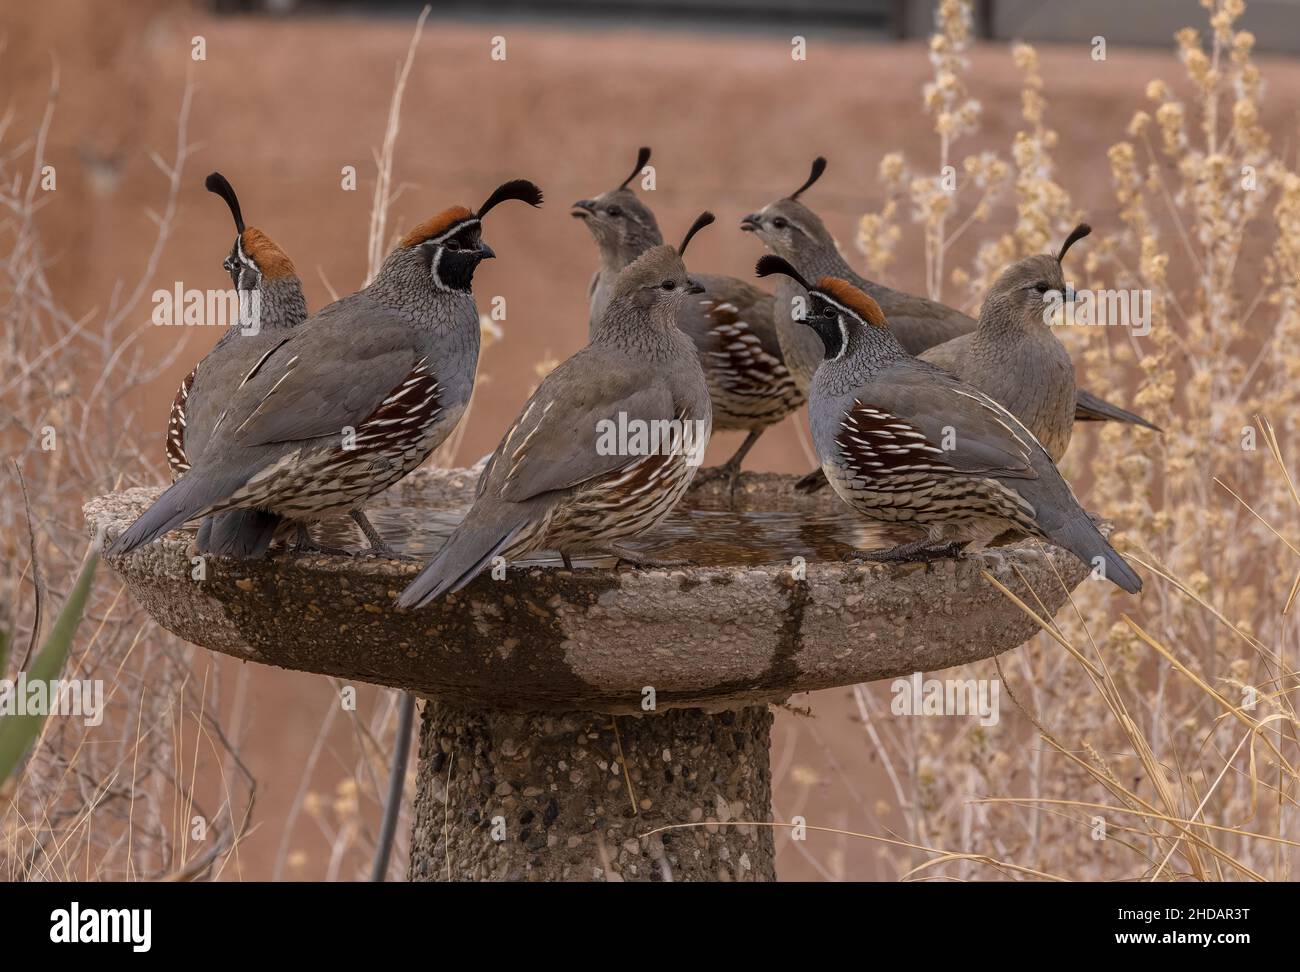 Group of Gambel's quail, Callipepla gambelii, drinking at bird-bath in the Chihuahua Desert, New Mexico. Stock Photo